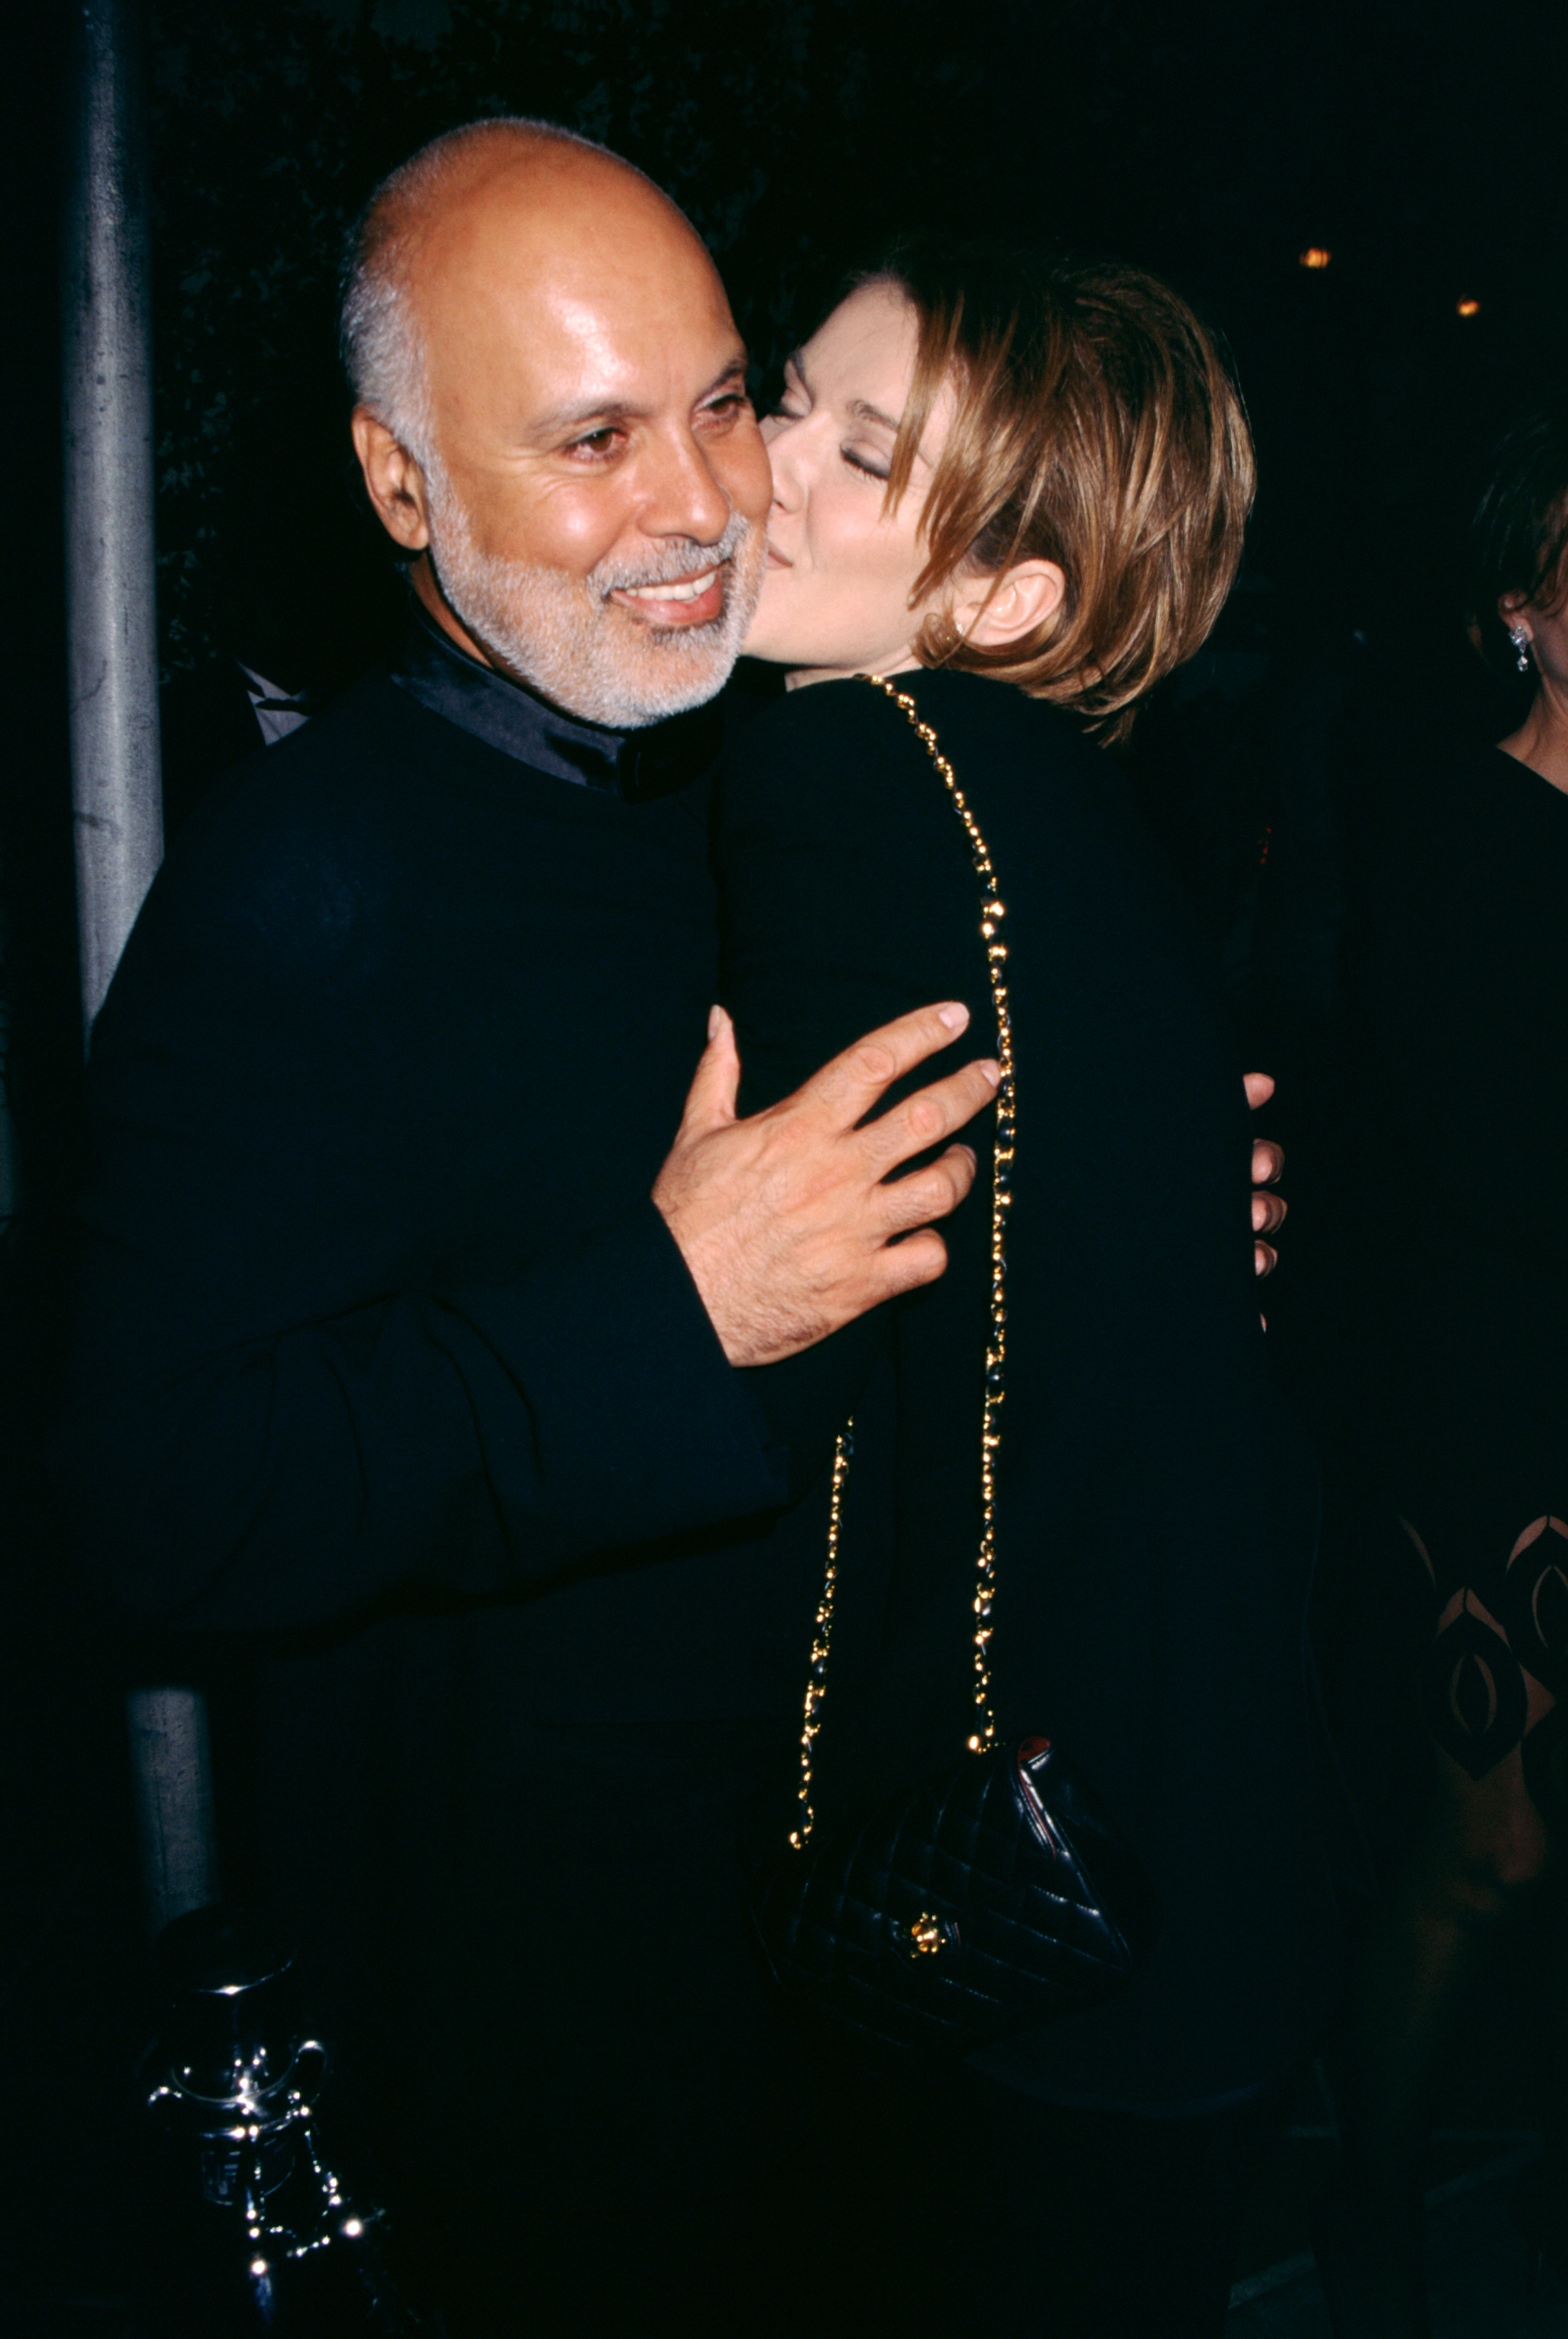 Rene Angelil and Celine Dion during the 38th Annual Grammy Awards on February 28, 1996 at the Shrine Auditorium in Los Angeles, California. | Source: Getty Images